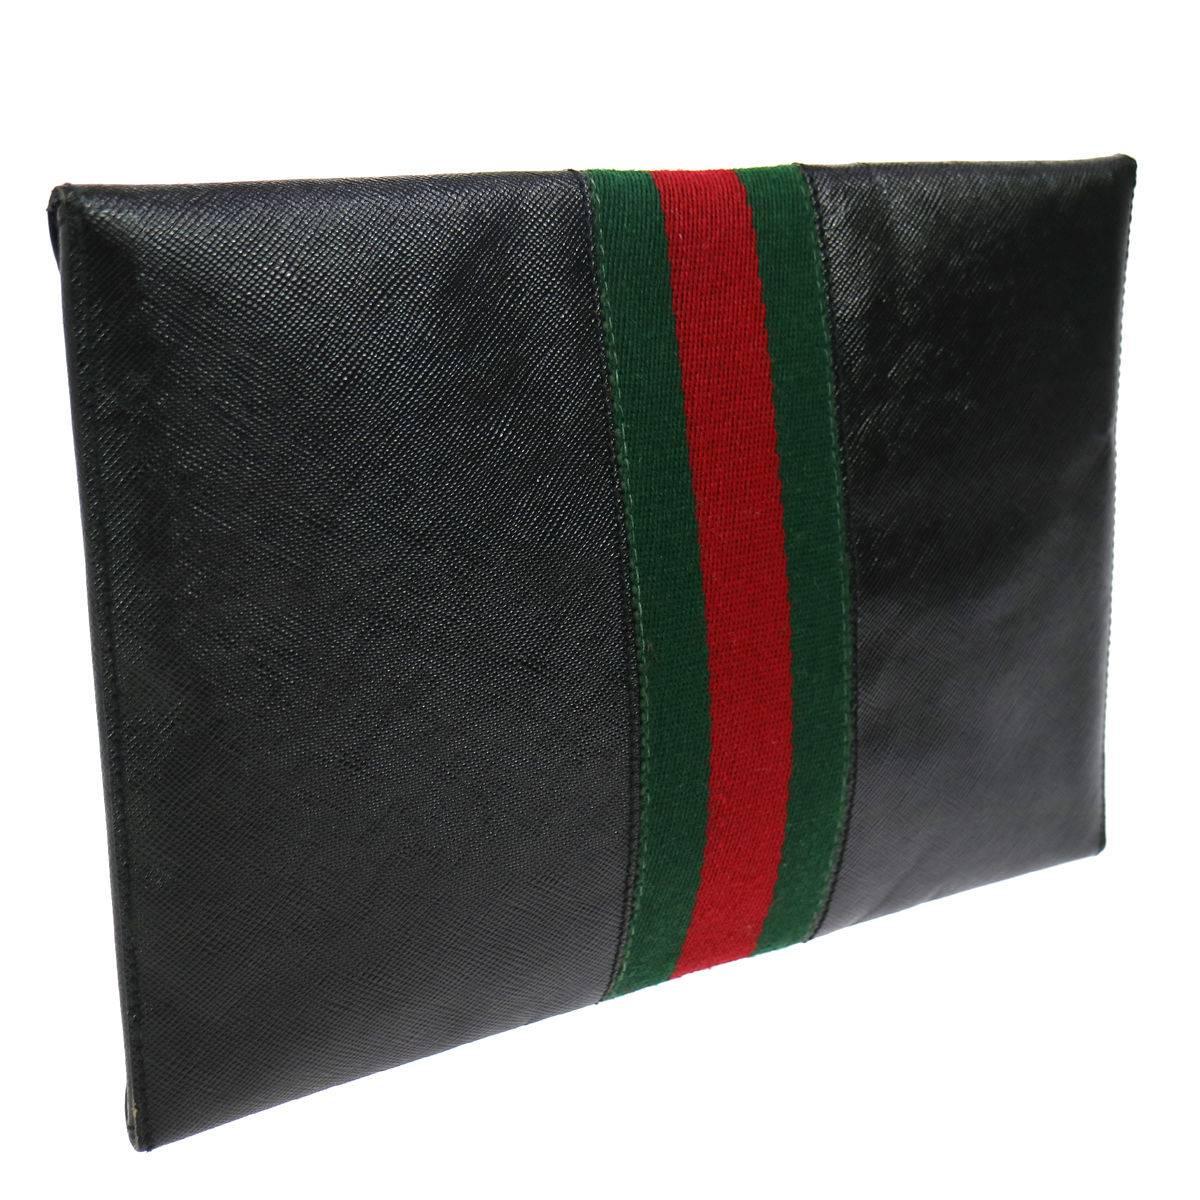 CURATOR'S NOTES

LOWEST PRICE REDUCTION!  Gucci Black Leather Web Men's Women's Tech Travel Attache Envelope Evening Clutch Bag With Keys 

Leather canvas
Fabric
Suede interior lining
Gold tone hardware
Push lock closure
Made in Italy
Measures